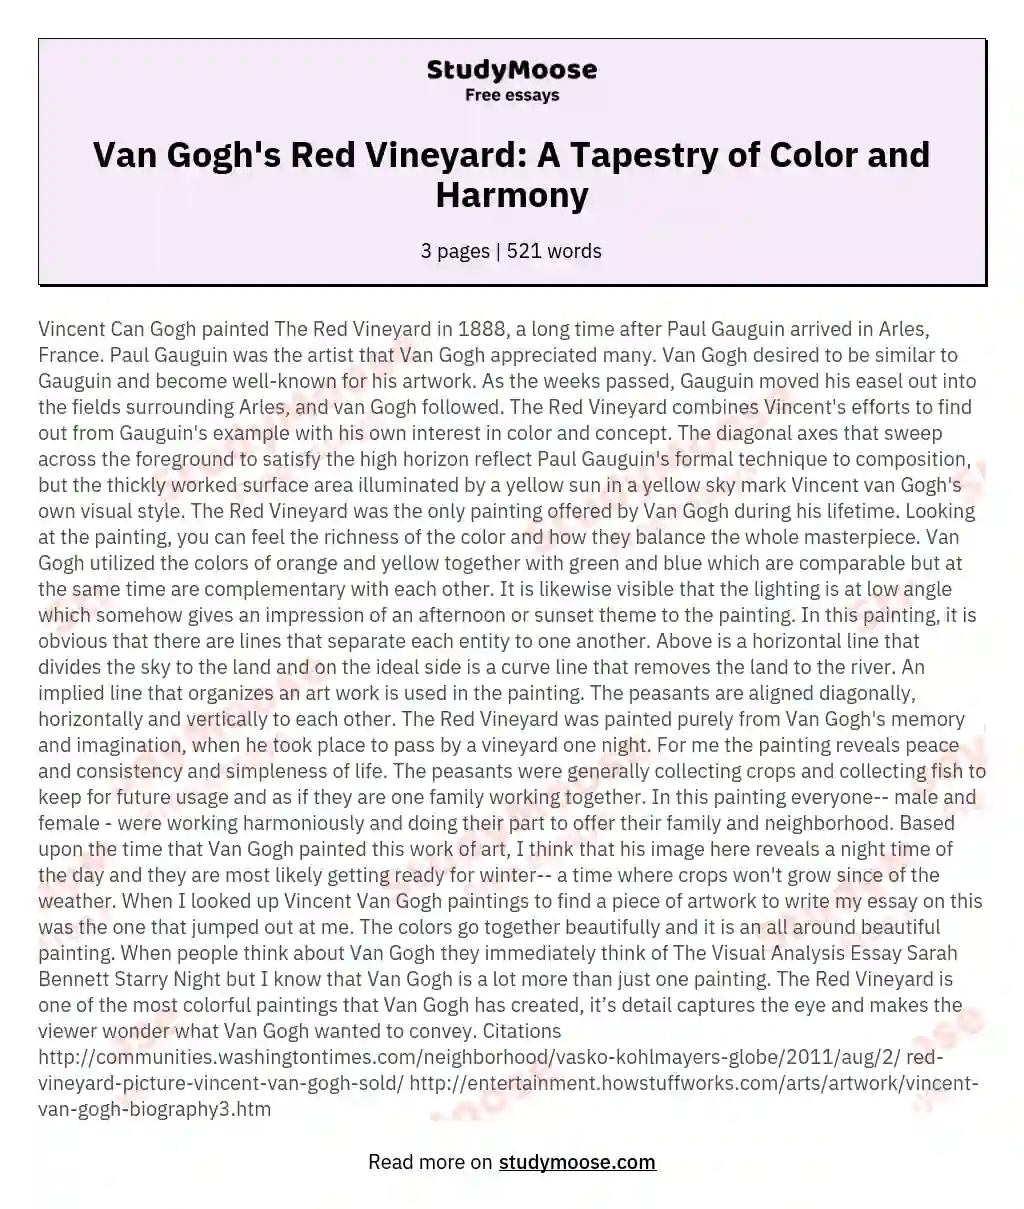 Van Gogh's Red Vineyard: A Tapestry of Color and Harmony essay